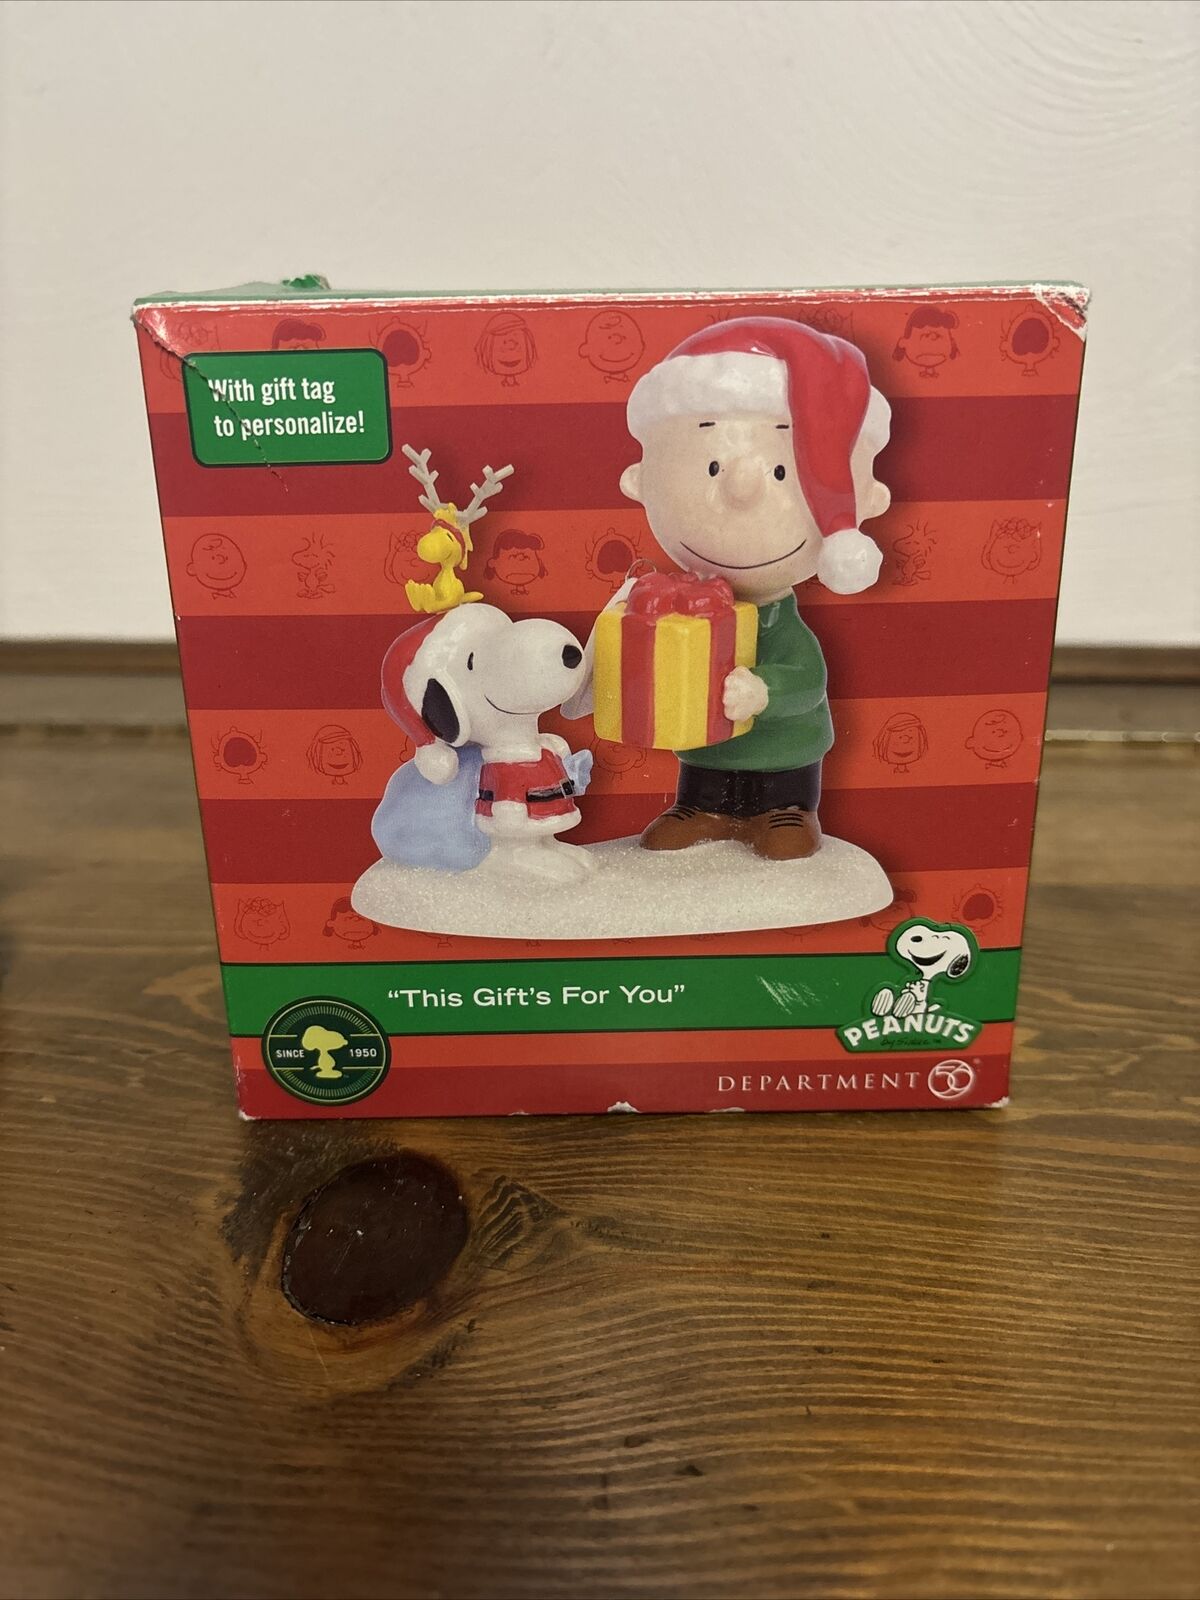 Peanuts By Schulz Department 56 This Gift's For You Figurine